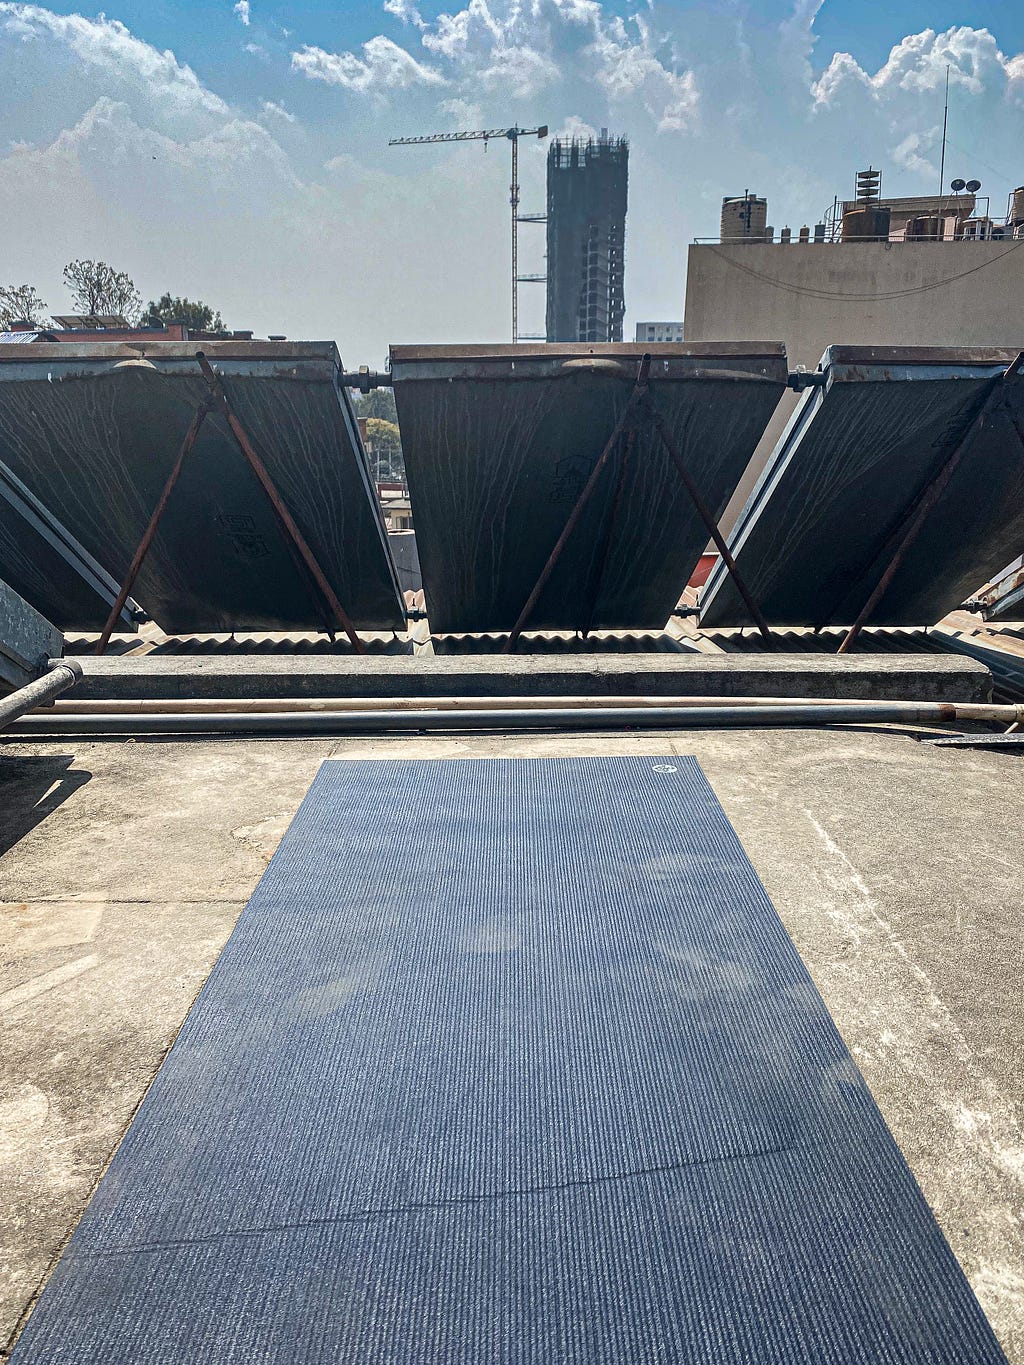 Daily Quarantine Rooftop Yoga- Photo by Author